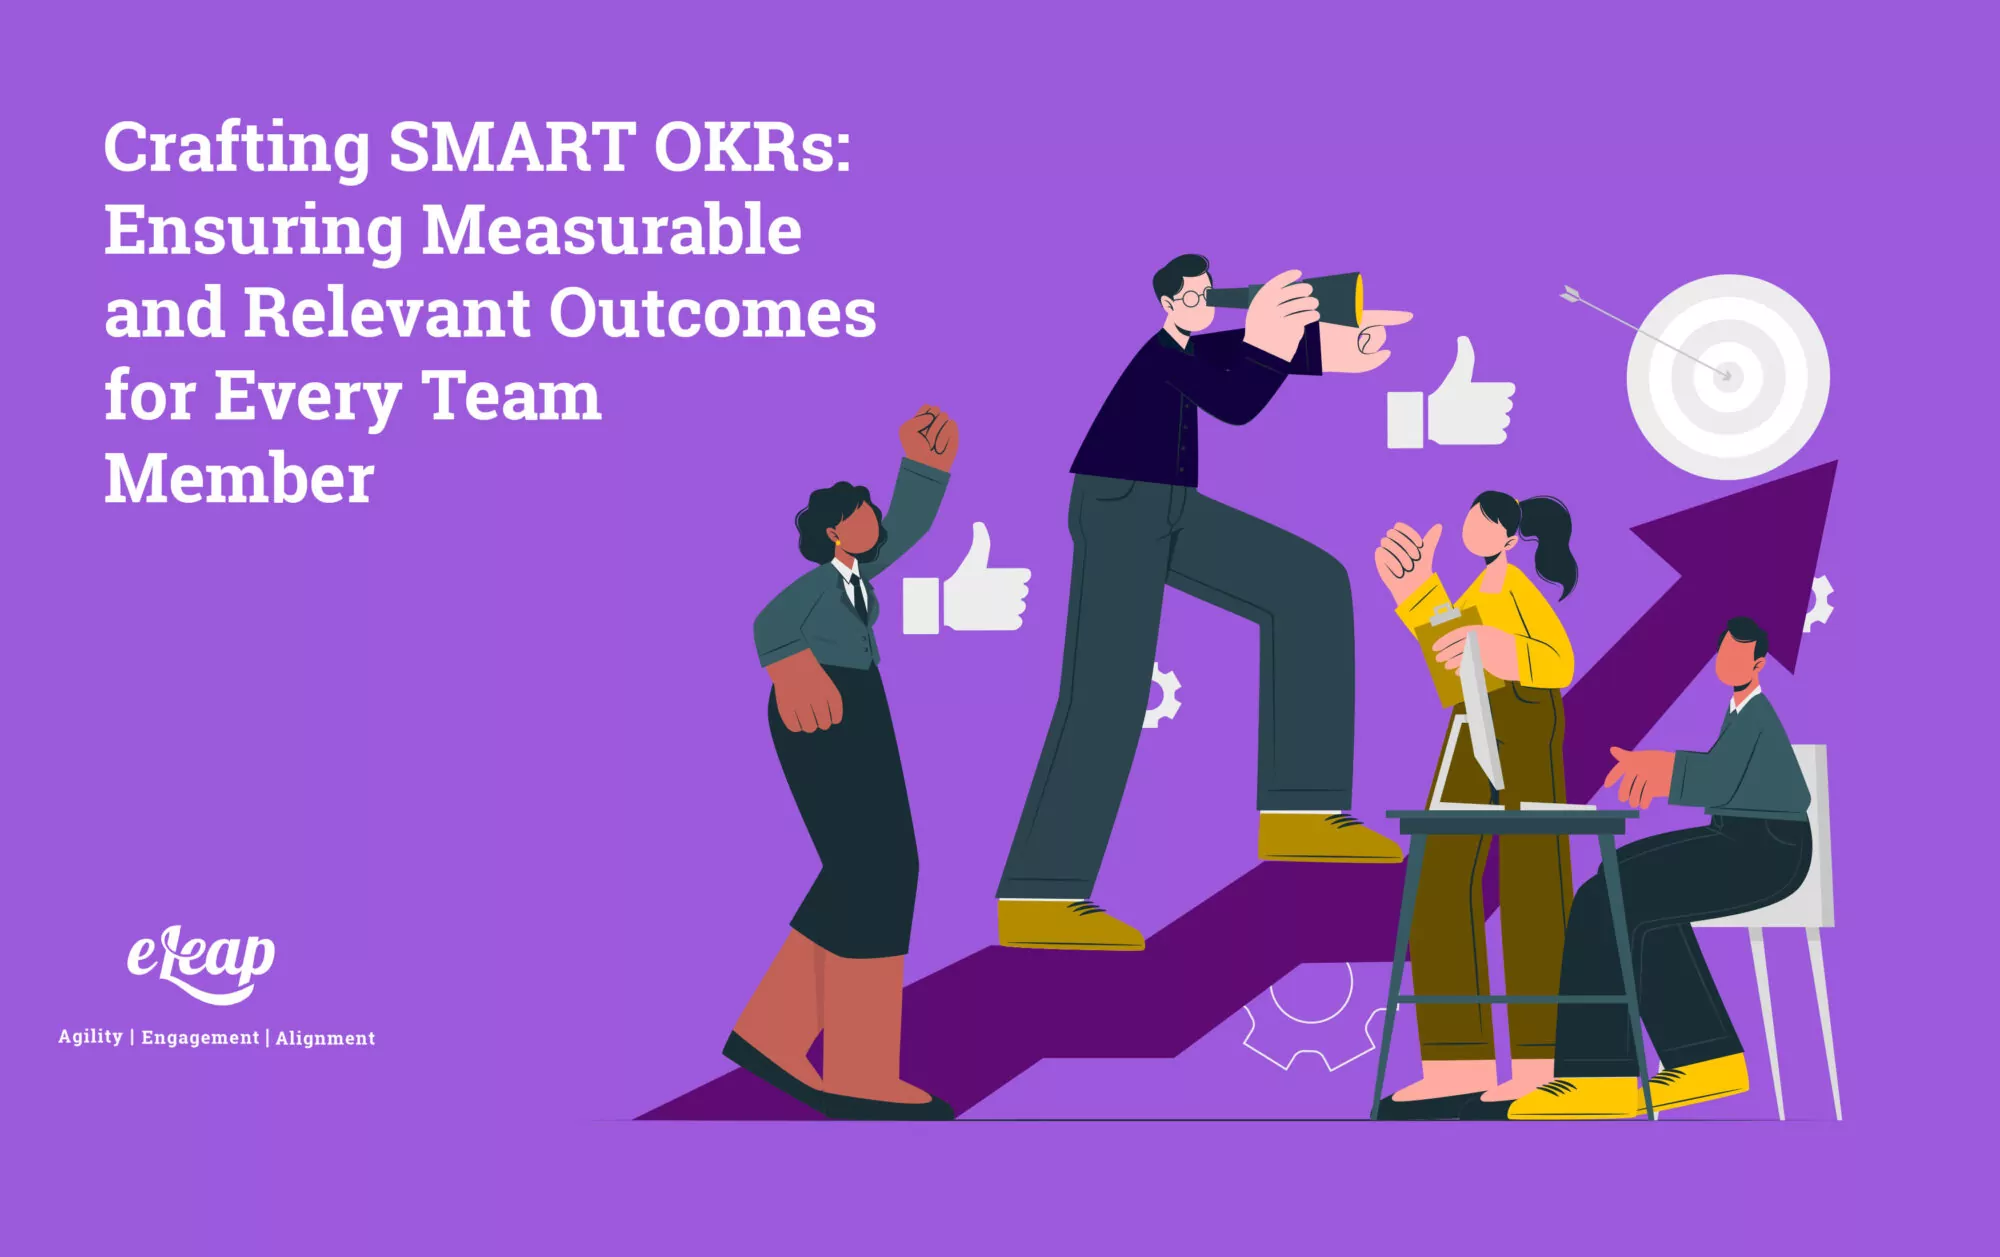 Crafting SMART OKRs: Ensuring Measurable and Relevant Outcomes for Every Team Member